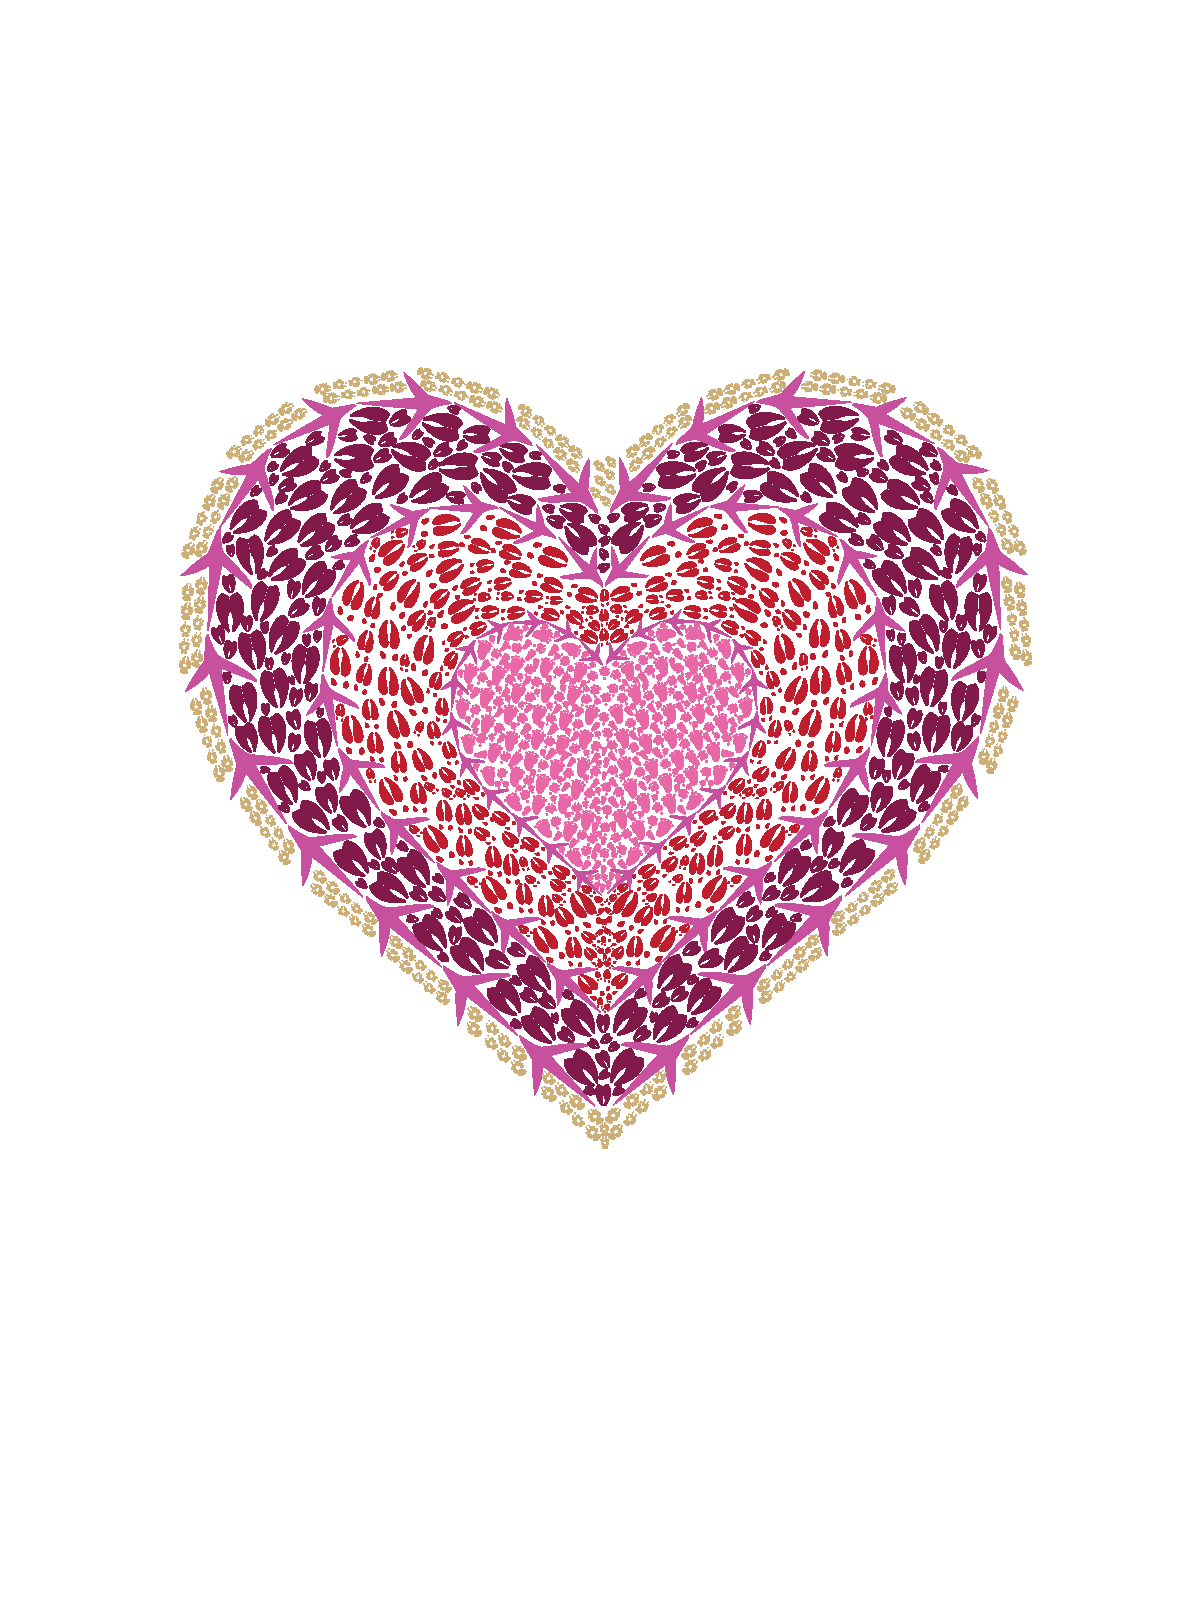 Pink Heart Track Note Cards